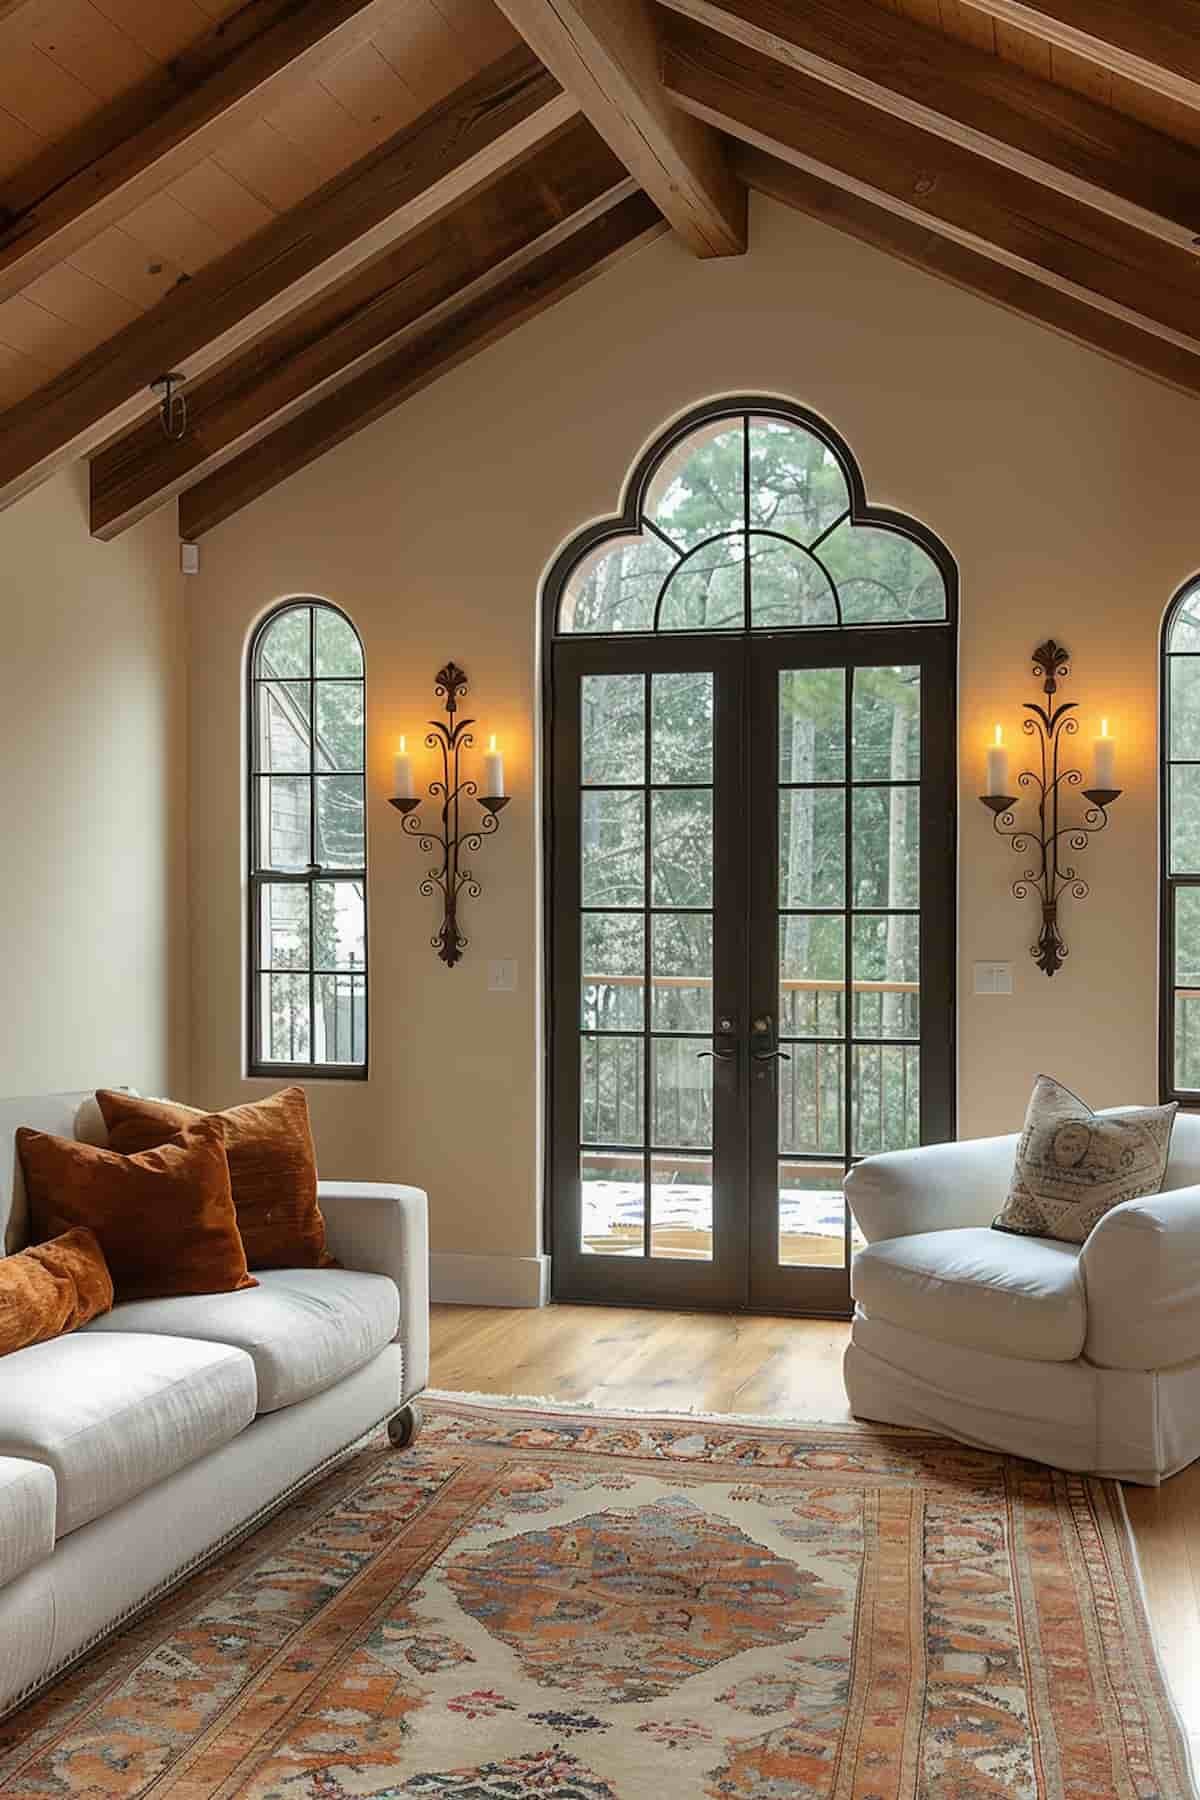 Wrought Iron Candle Sconces on the Walls